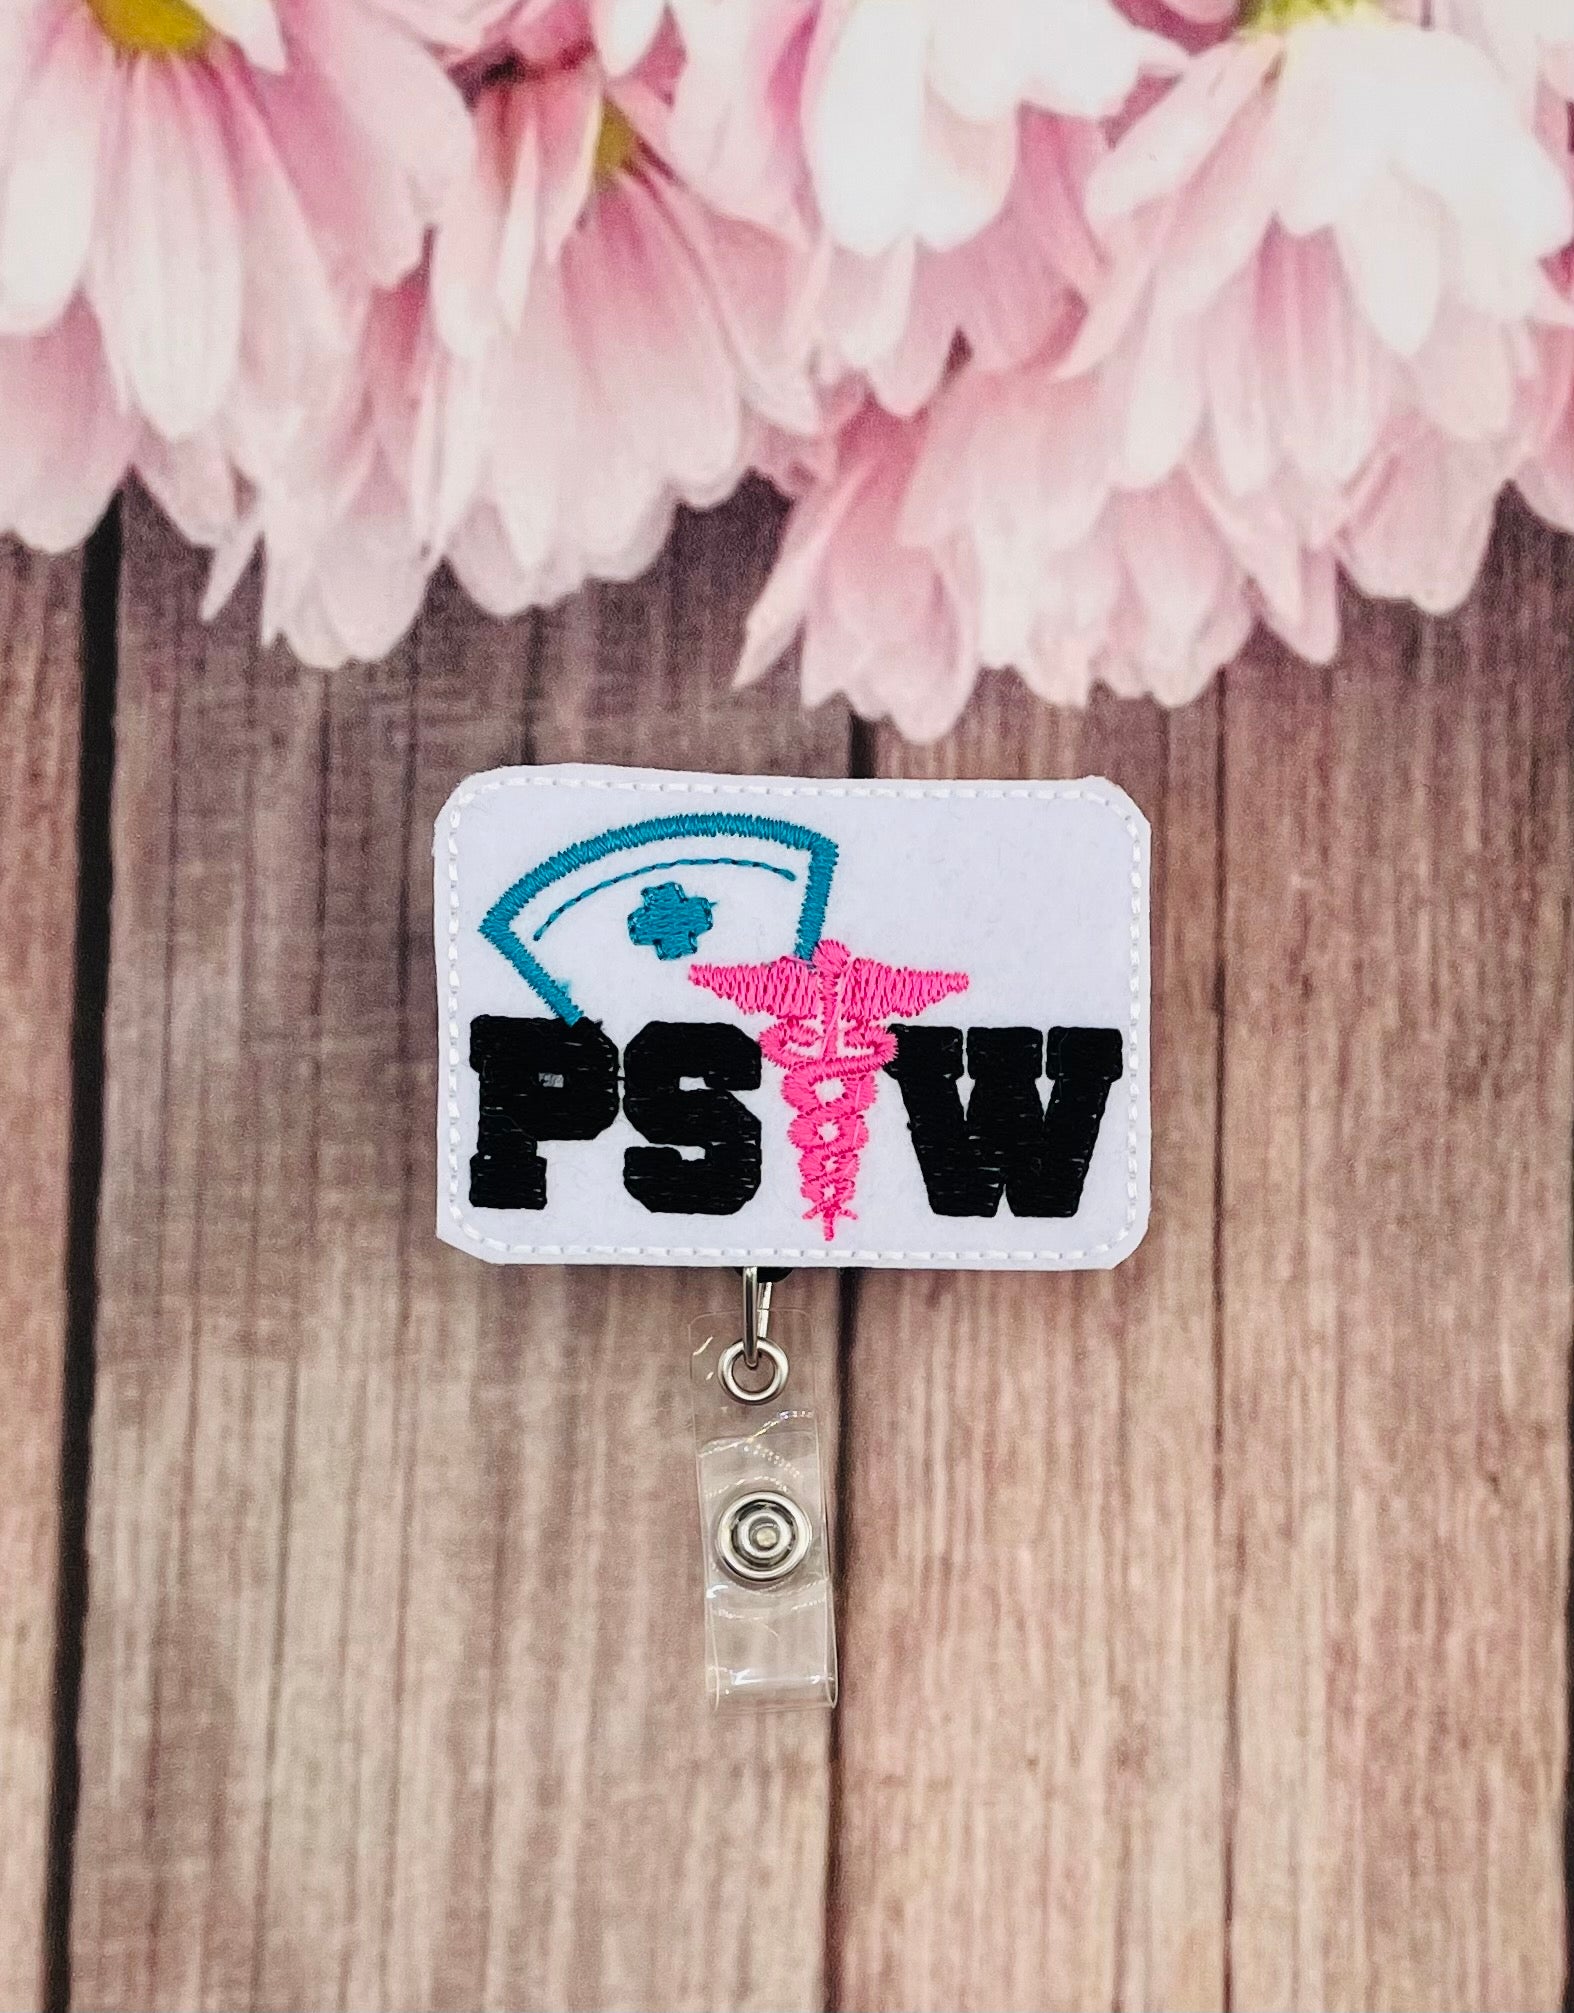 Psw personal support worker badge reel